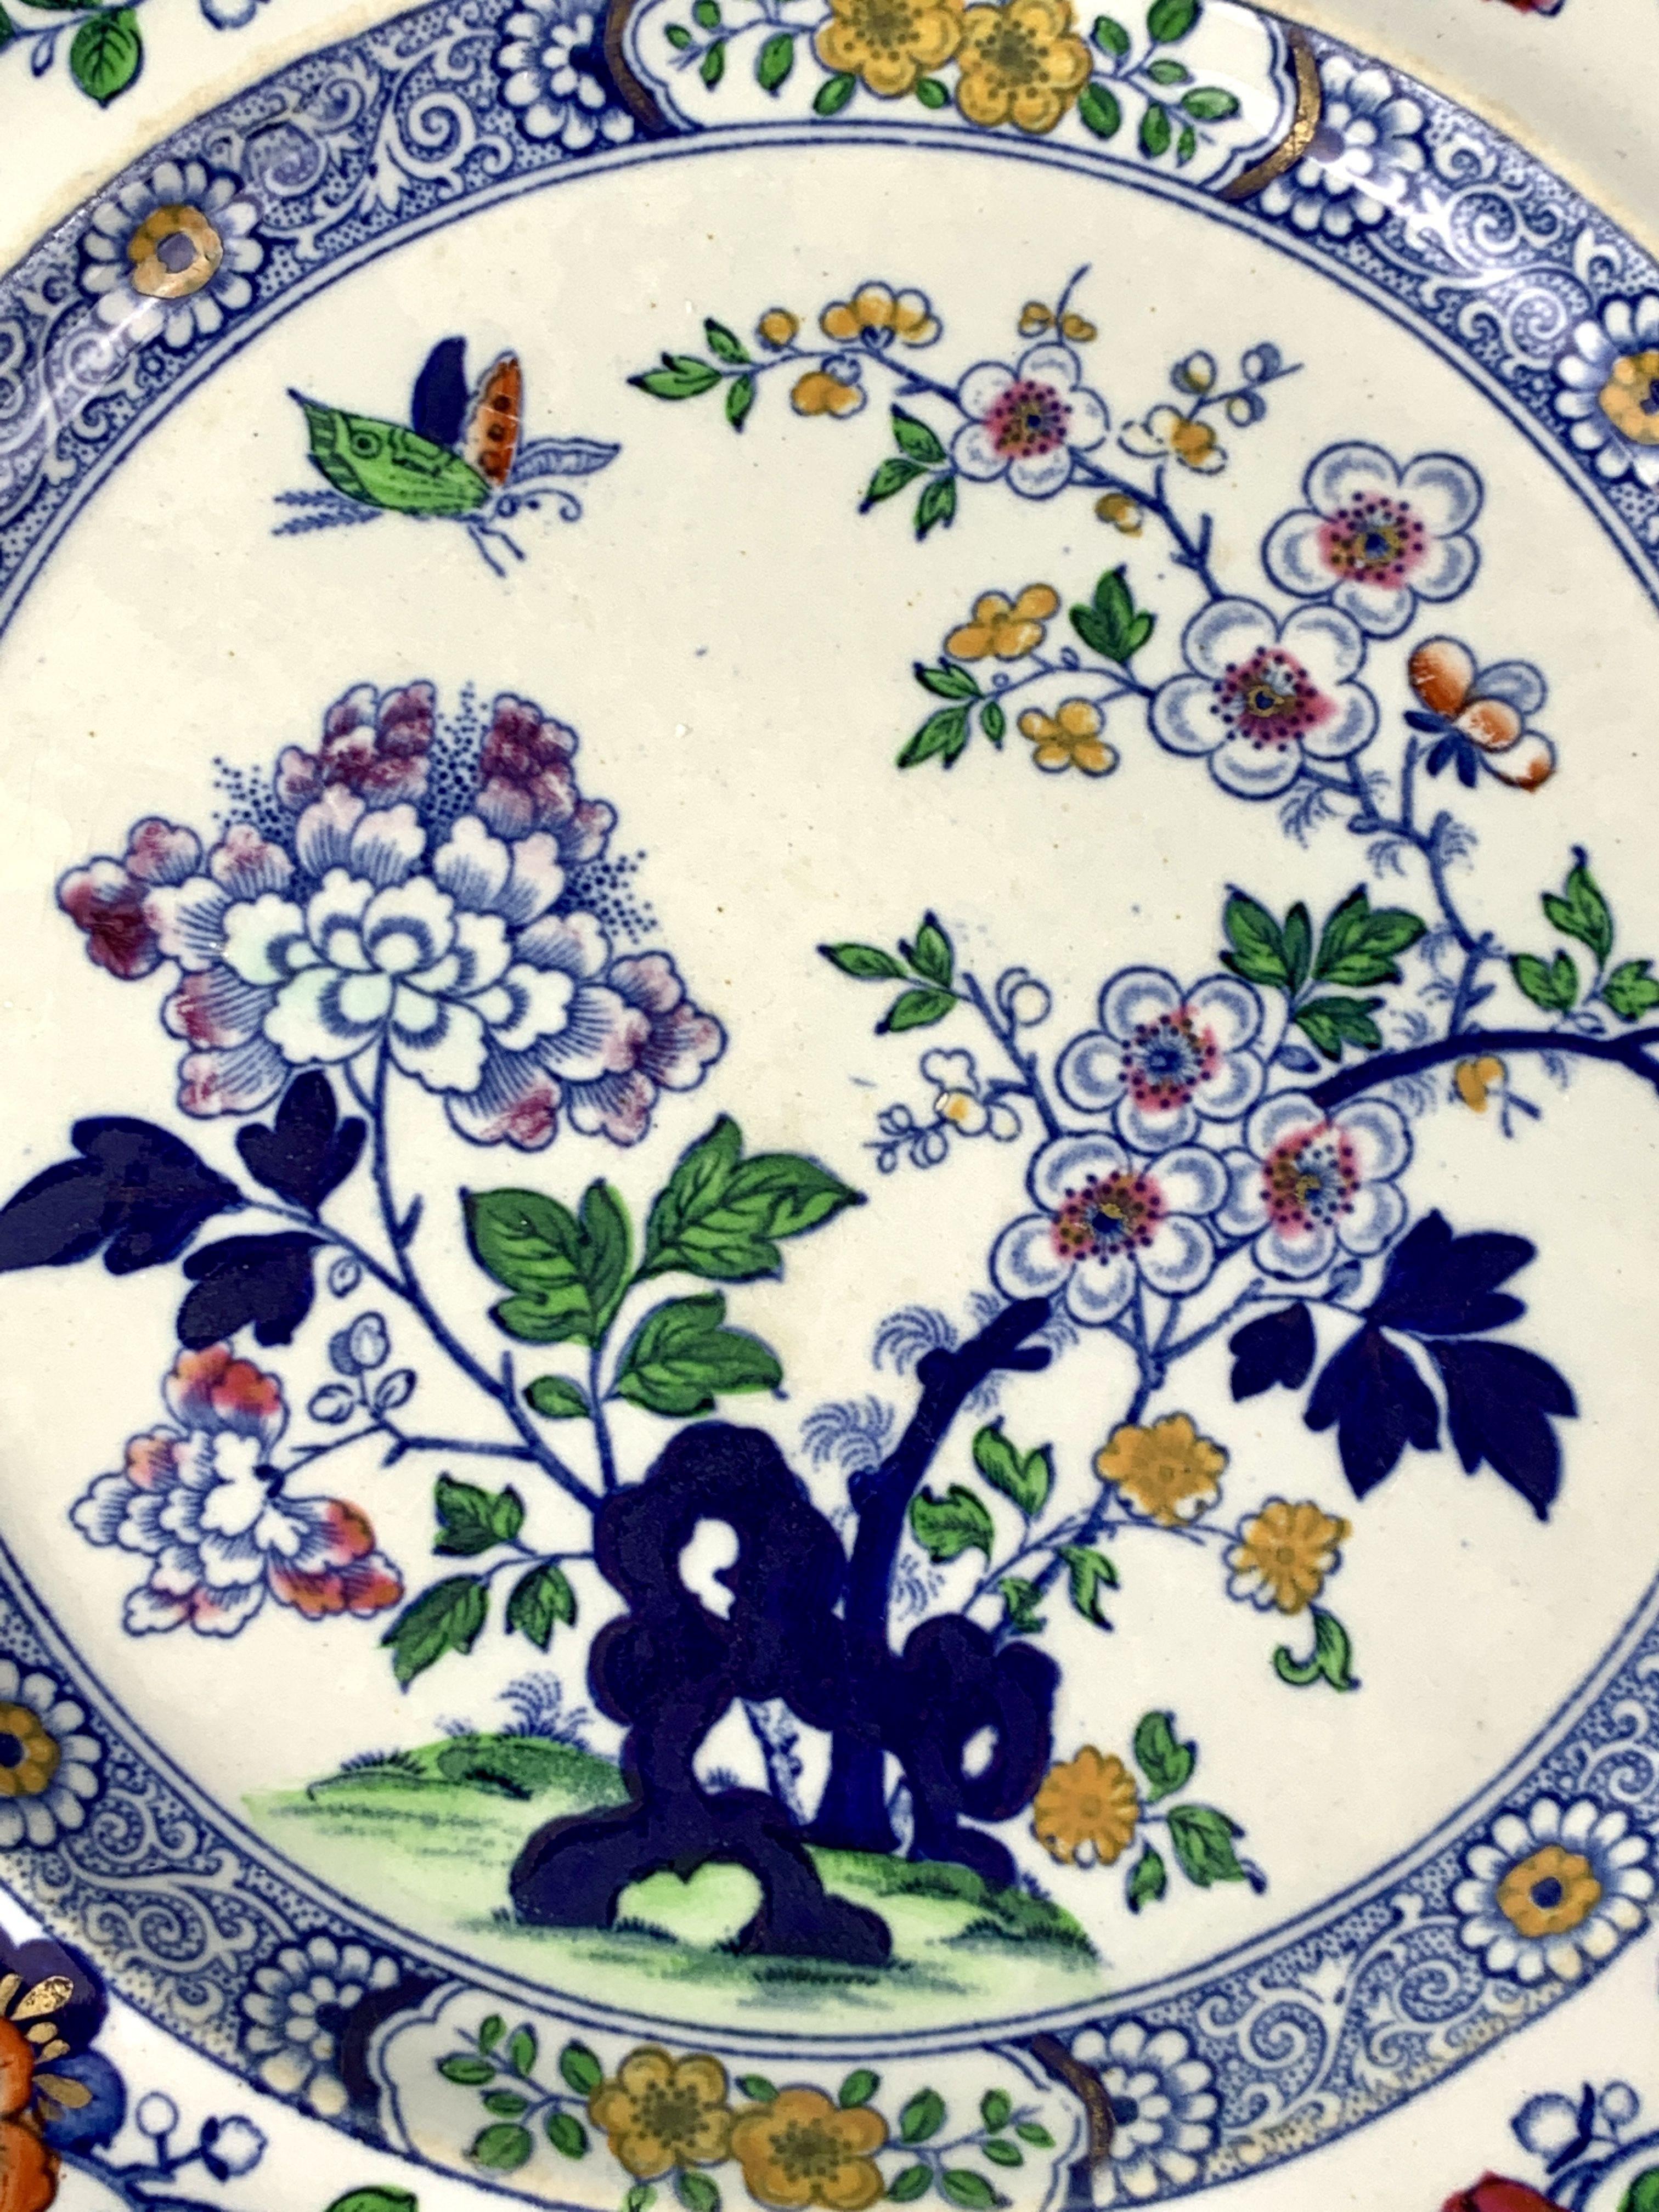 Made by Hicks and Meigh, this set has six dinner dishes and five matching soup dishes.
The decoration is lovely: a butterfly hovers above a flower-filled garden.
We see purple peonies and pink fruit tree blossoms emanating from cobalt blue